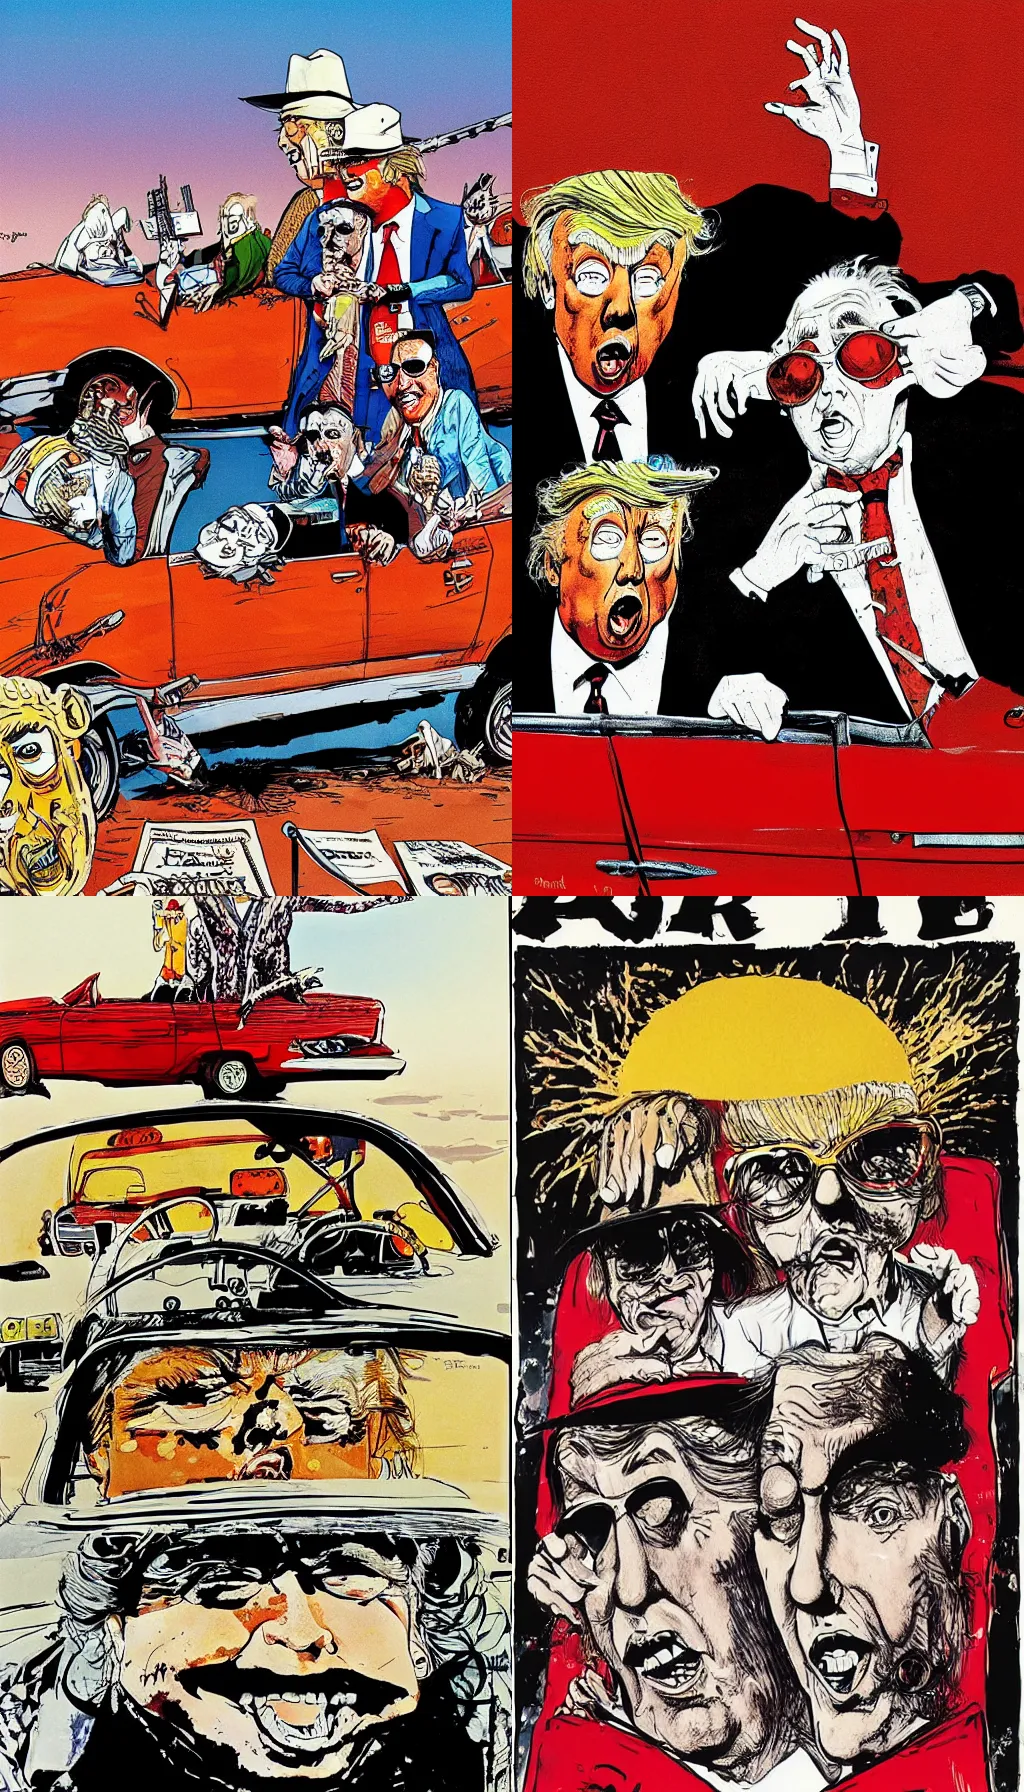 Prompt: ralph steadman illustration of donald trump and roger stone on the poster of fear and loathing in las vegas, red convertible classic car, desert landscape, panting, film grain, surreal